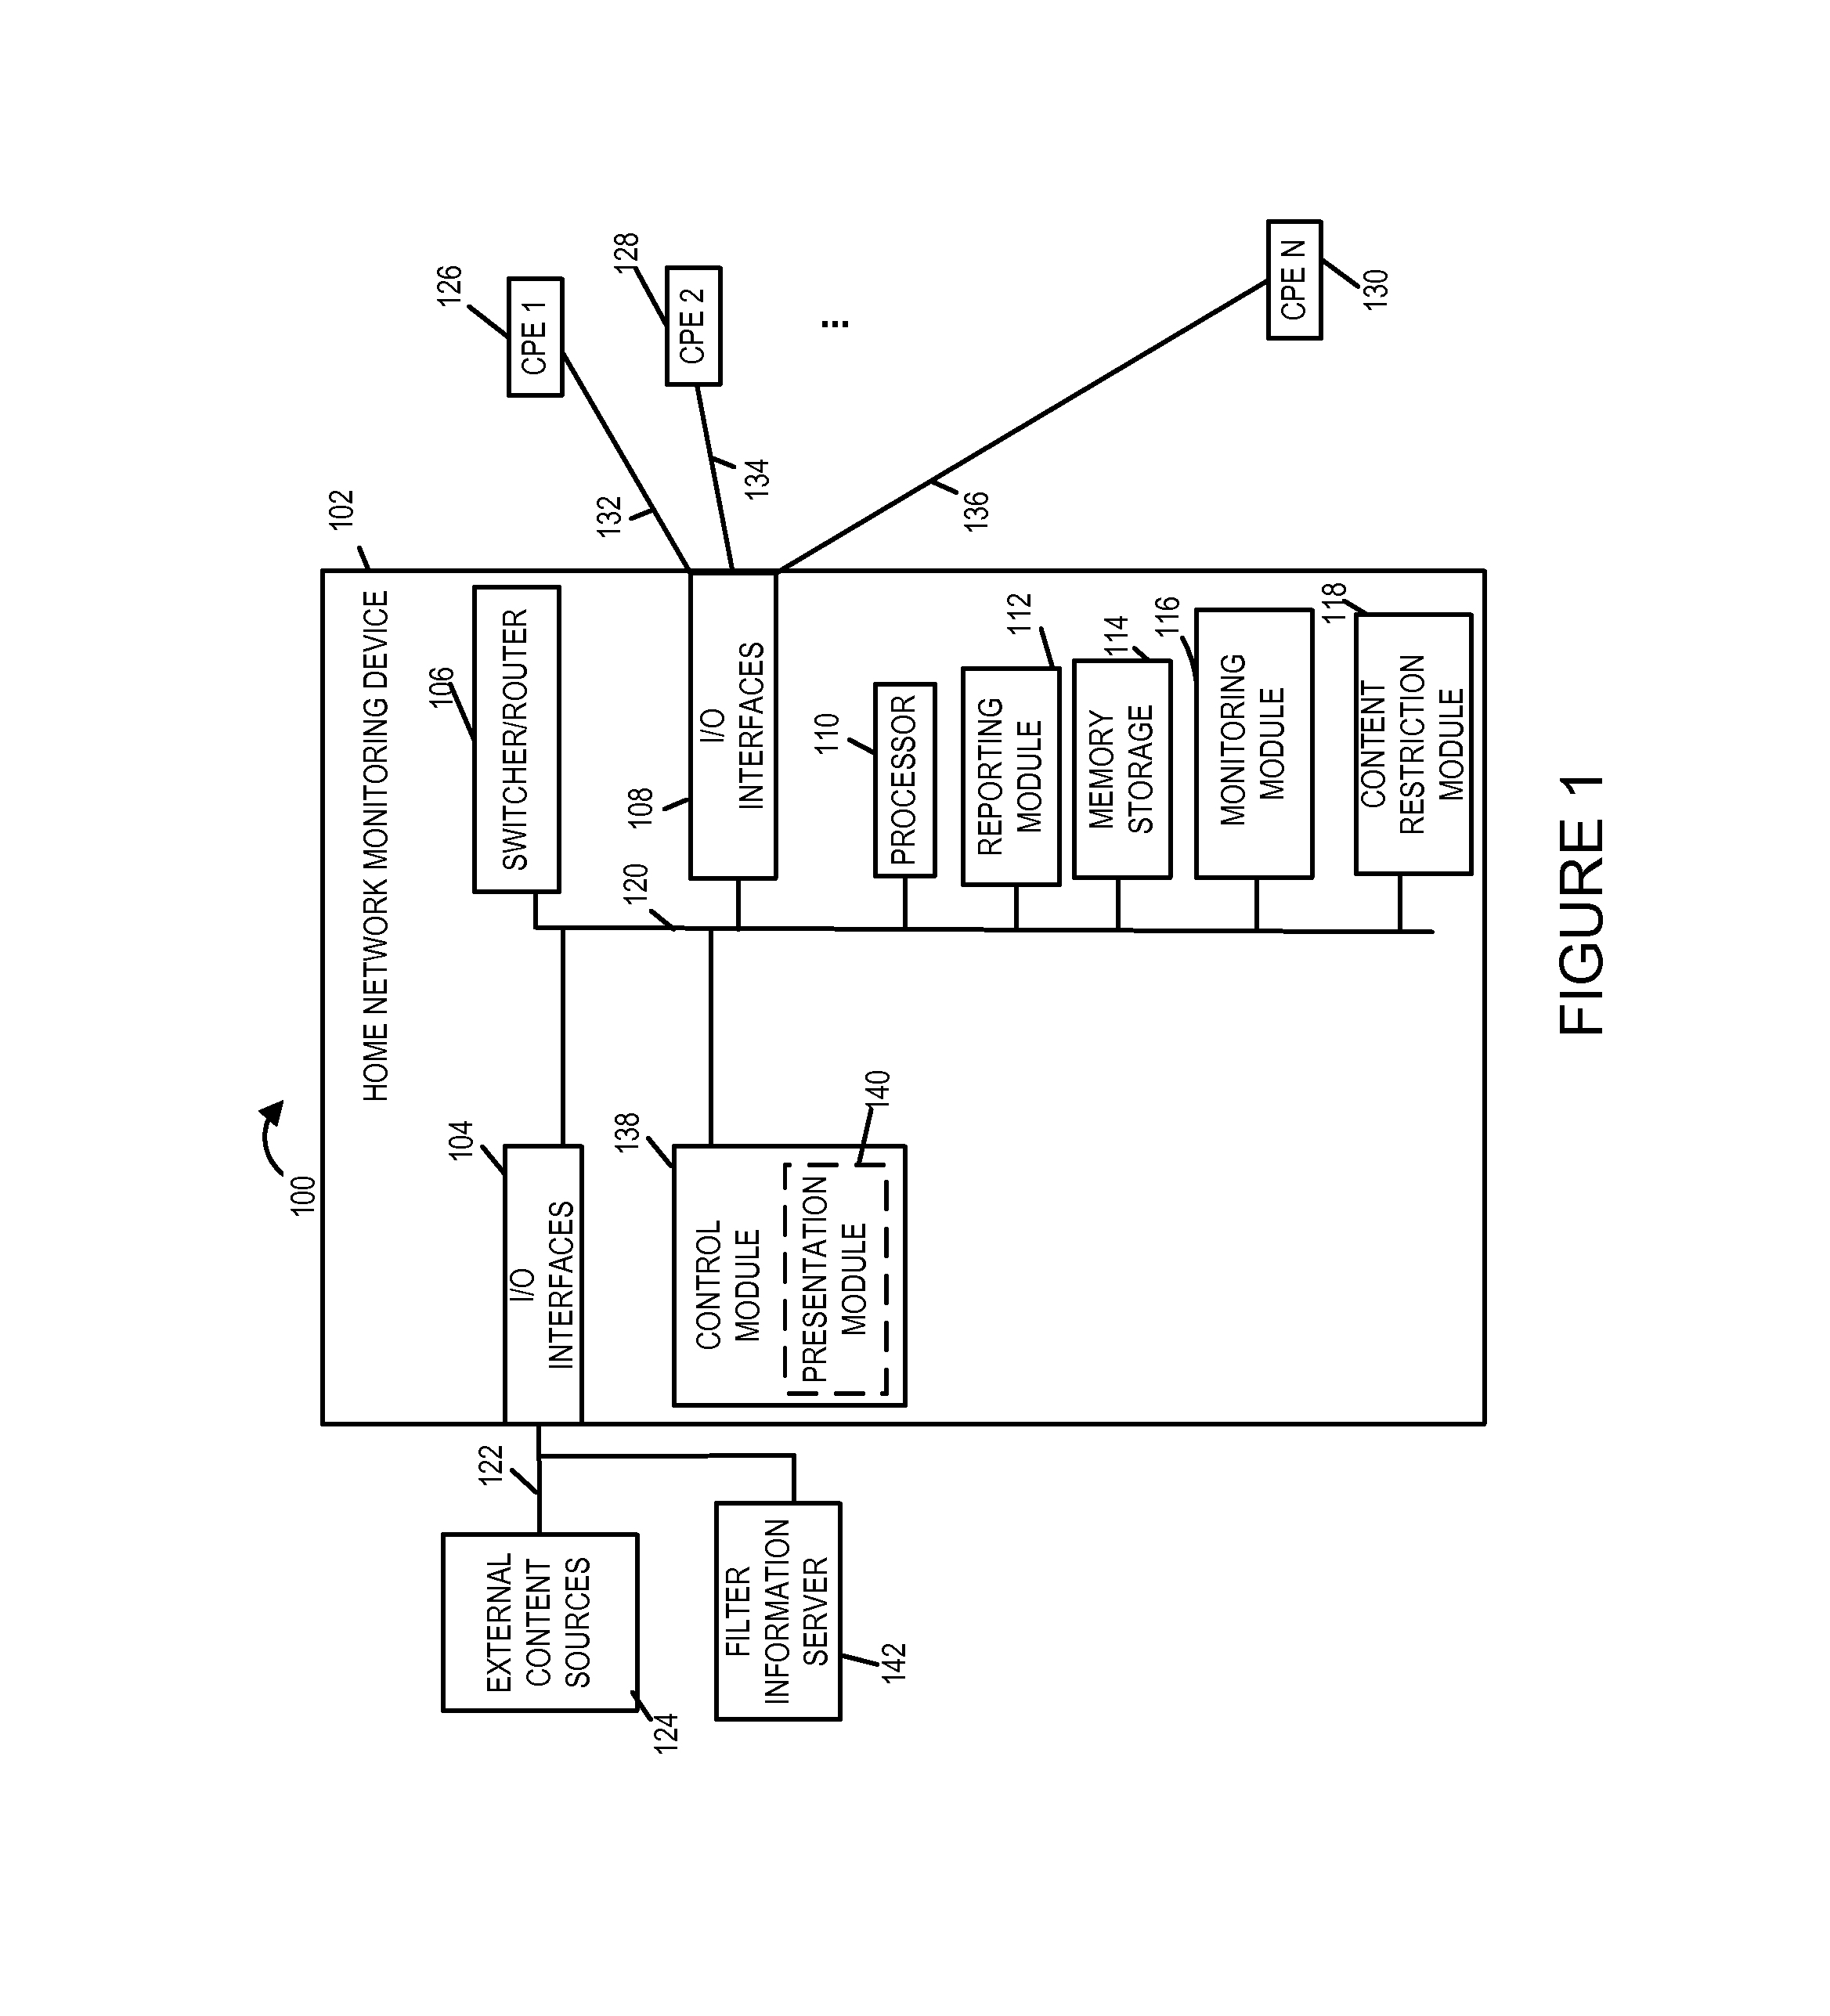 Methods and apparatus for providing parental or guardian control and visualization over communications to various devices in the home